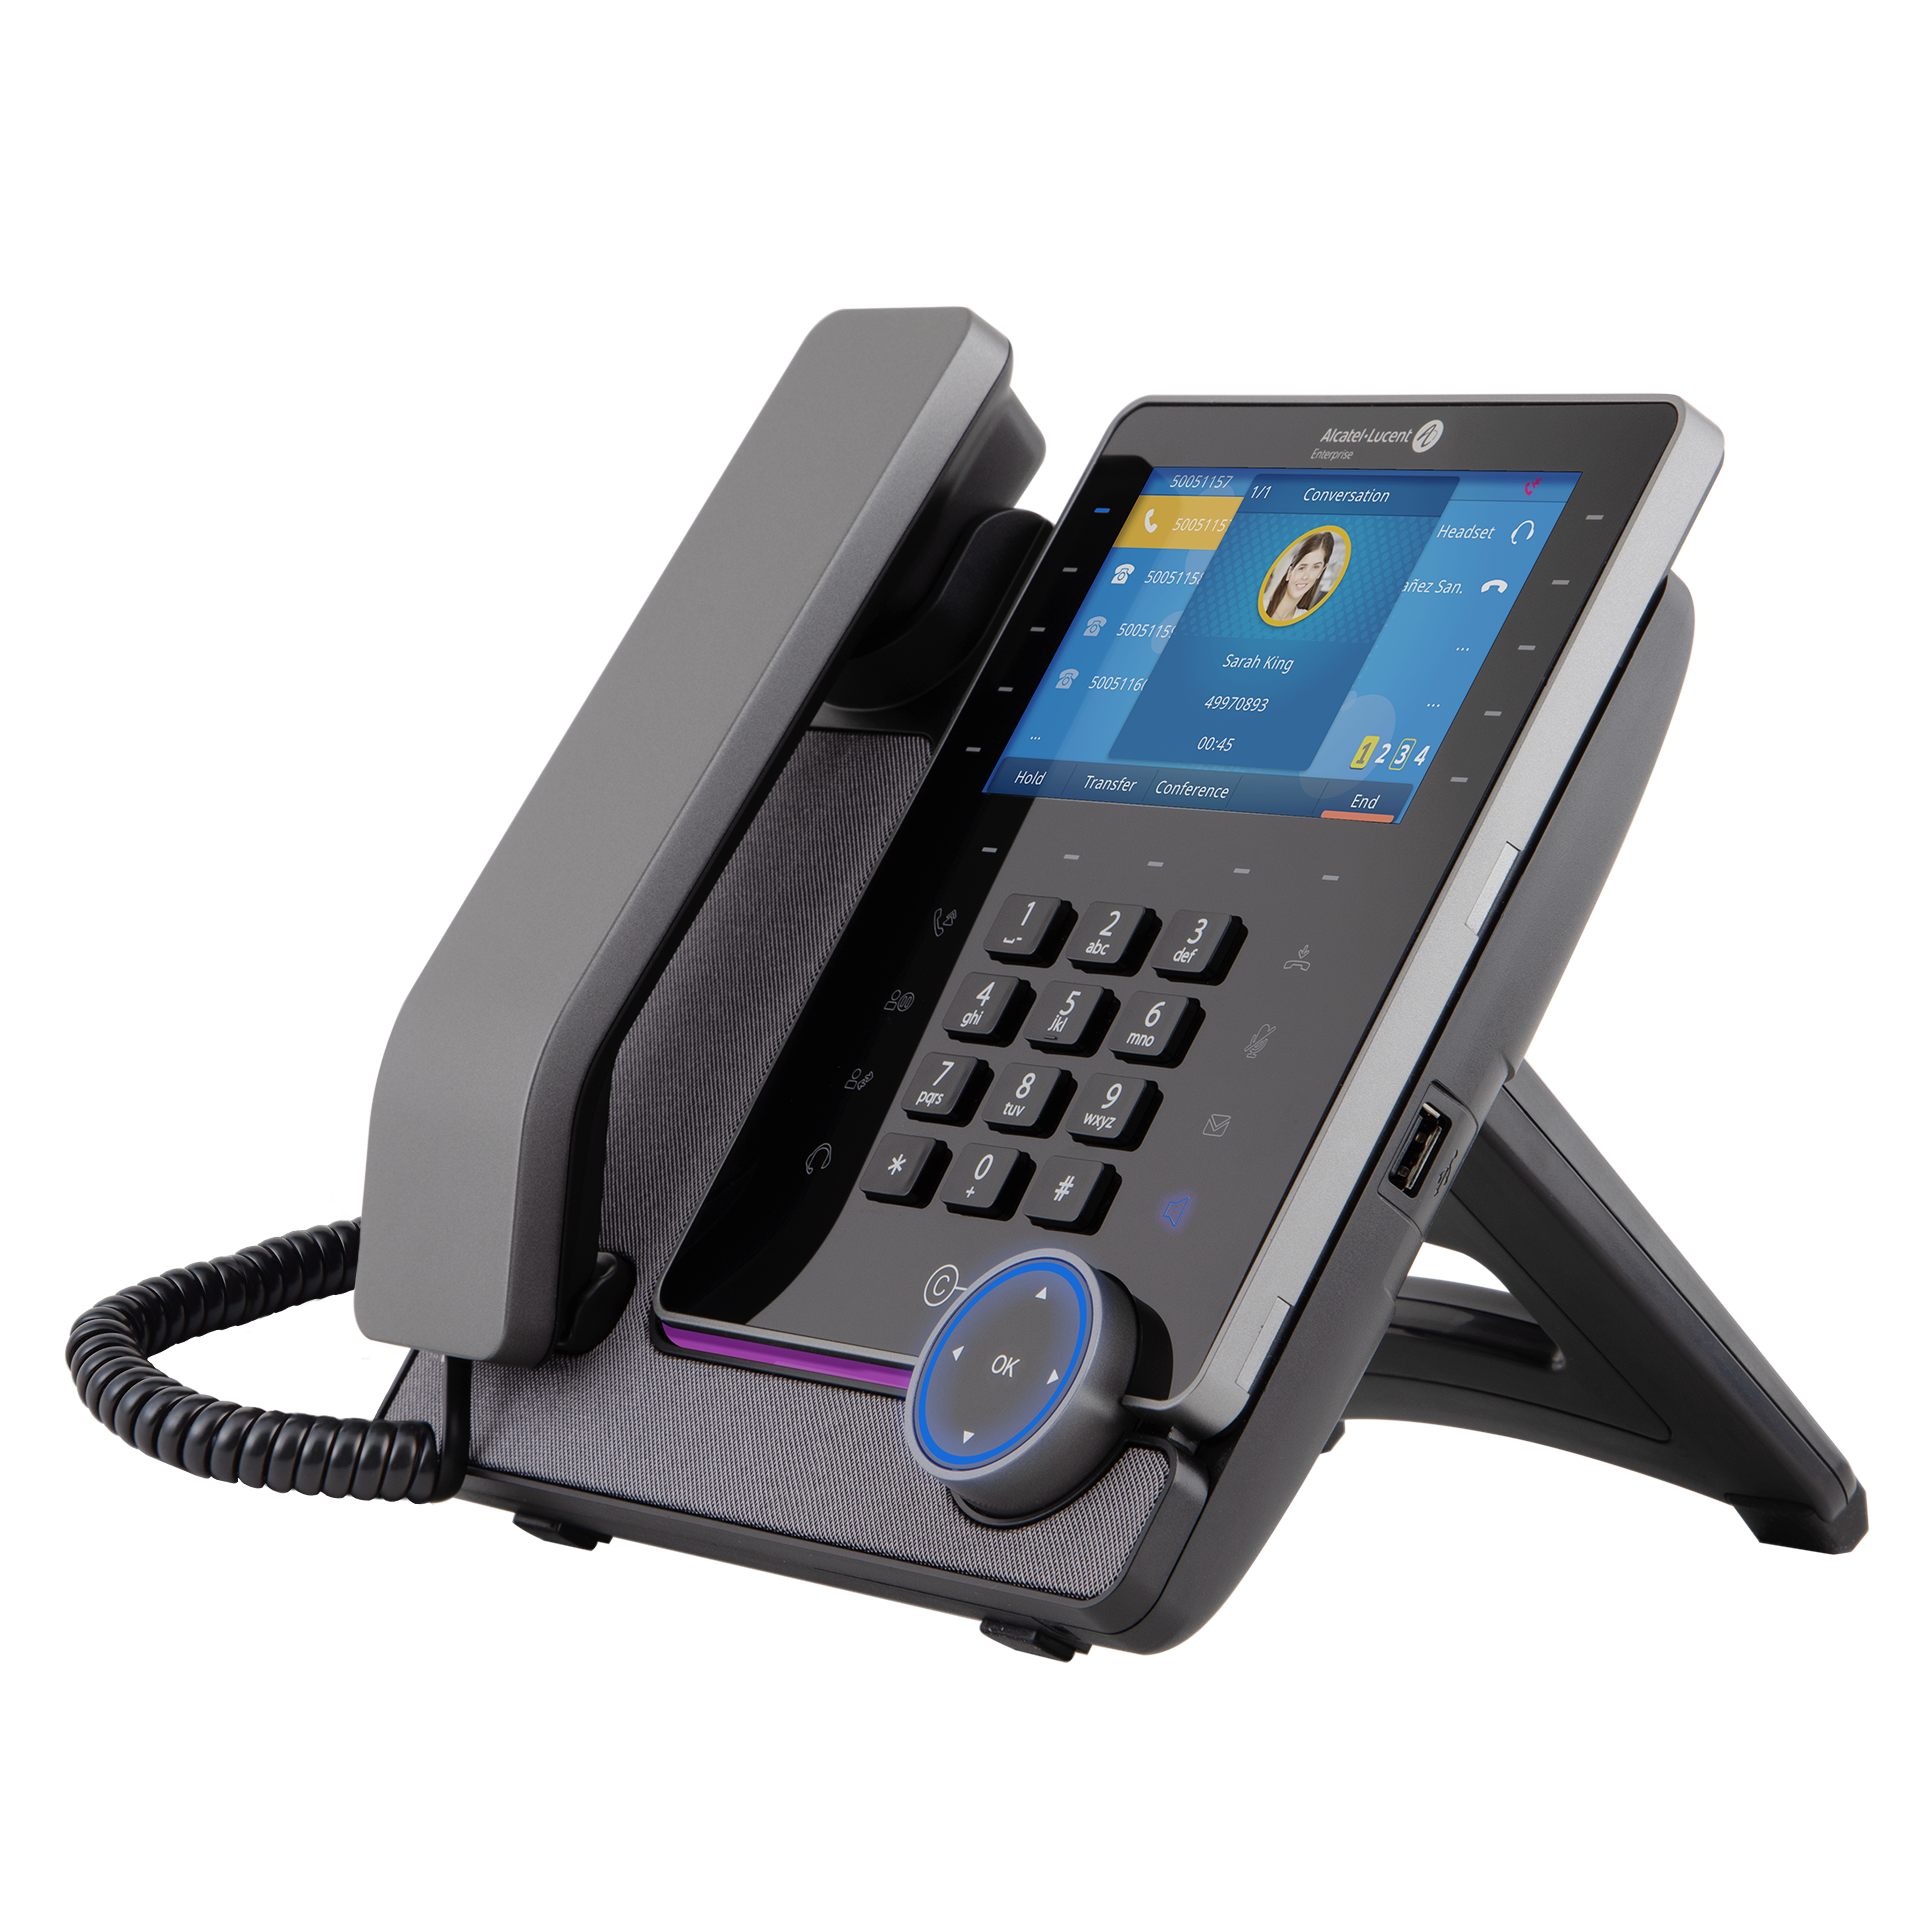 Alcater-lucent Superwideband Handfree 5" 800x480 color display M8 DESKPHONE